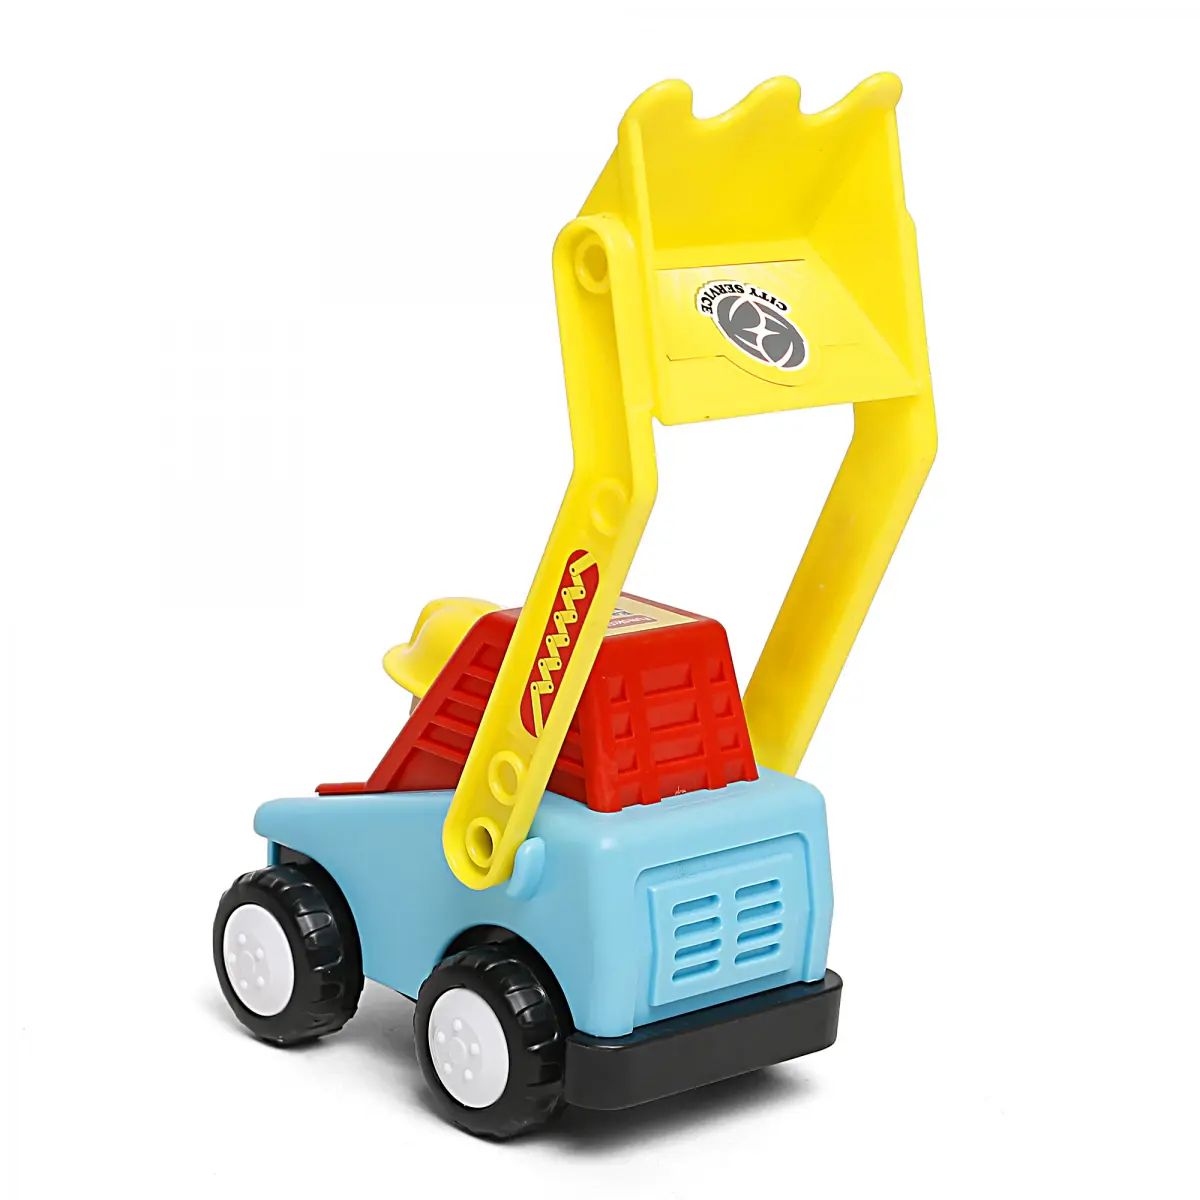 Giggles Earth Mover Vehicle Toys, 18M+, Multicolour